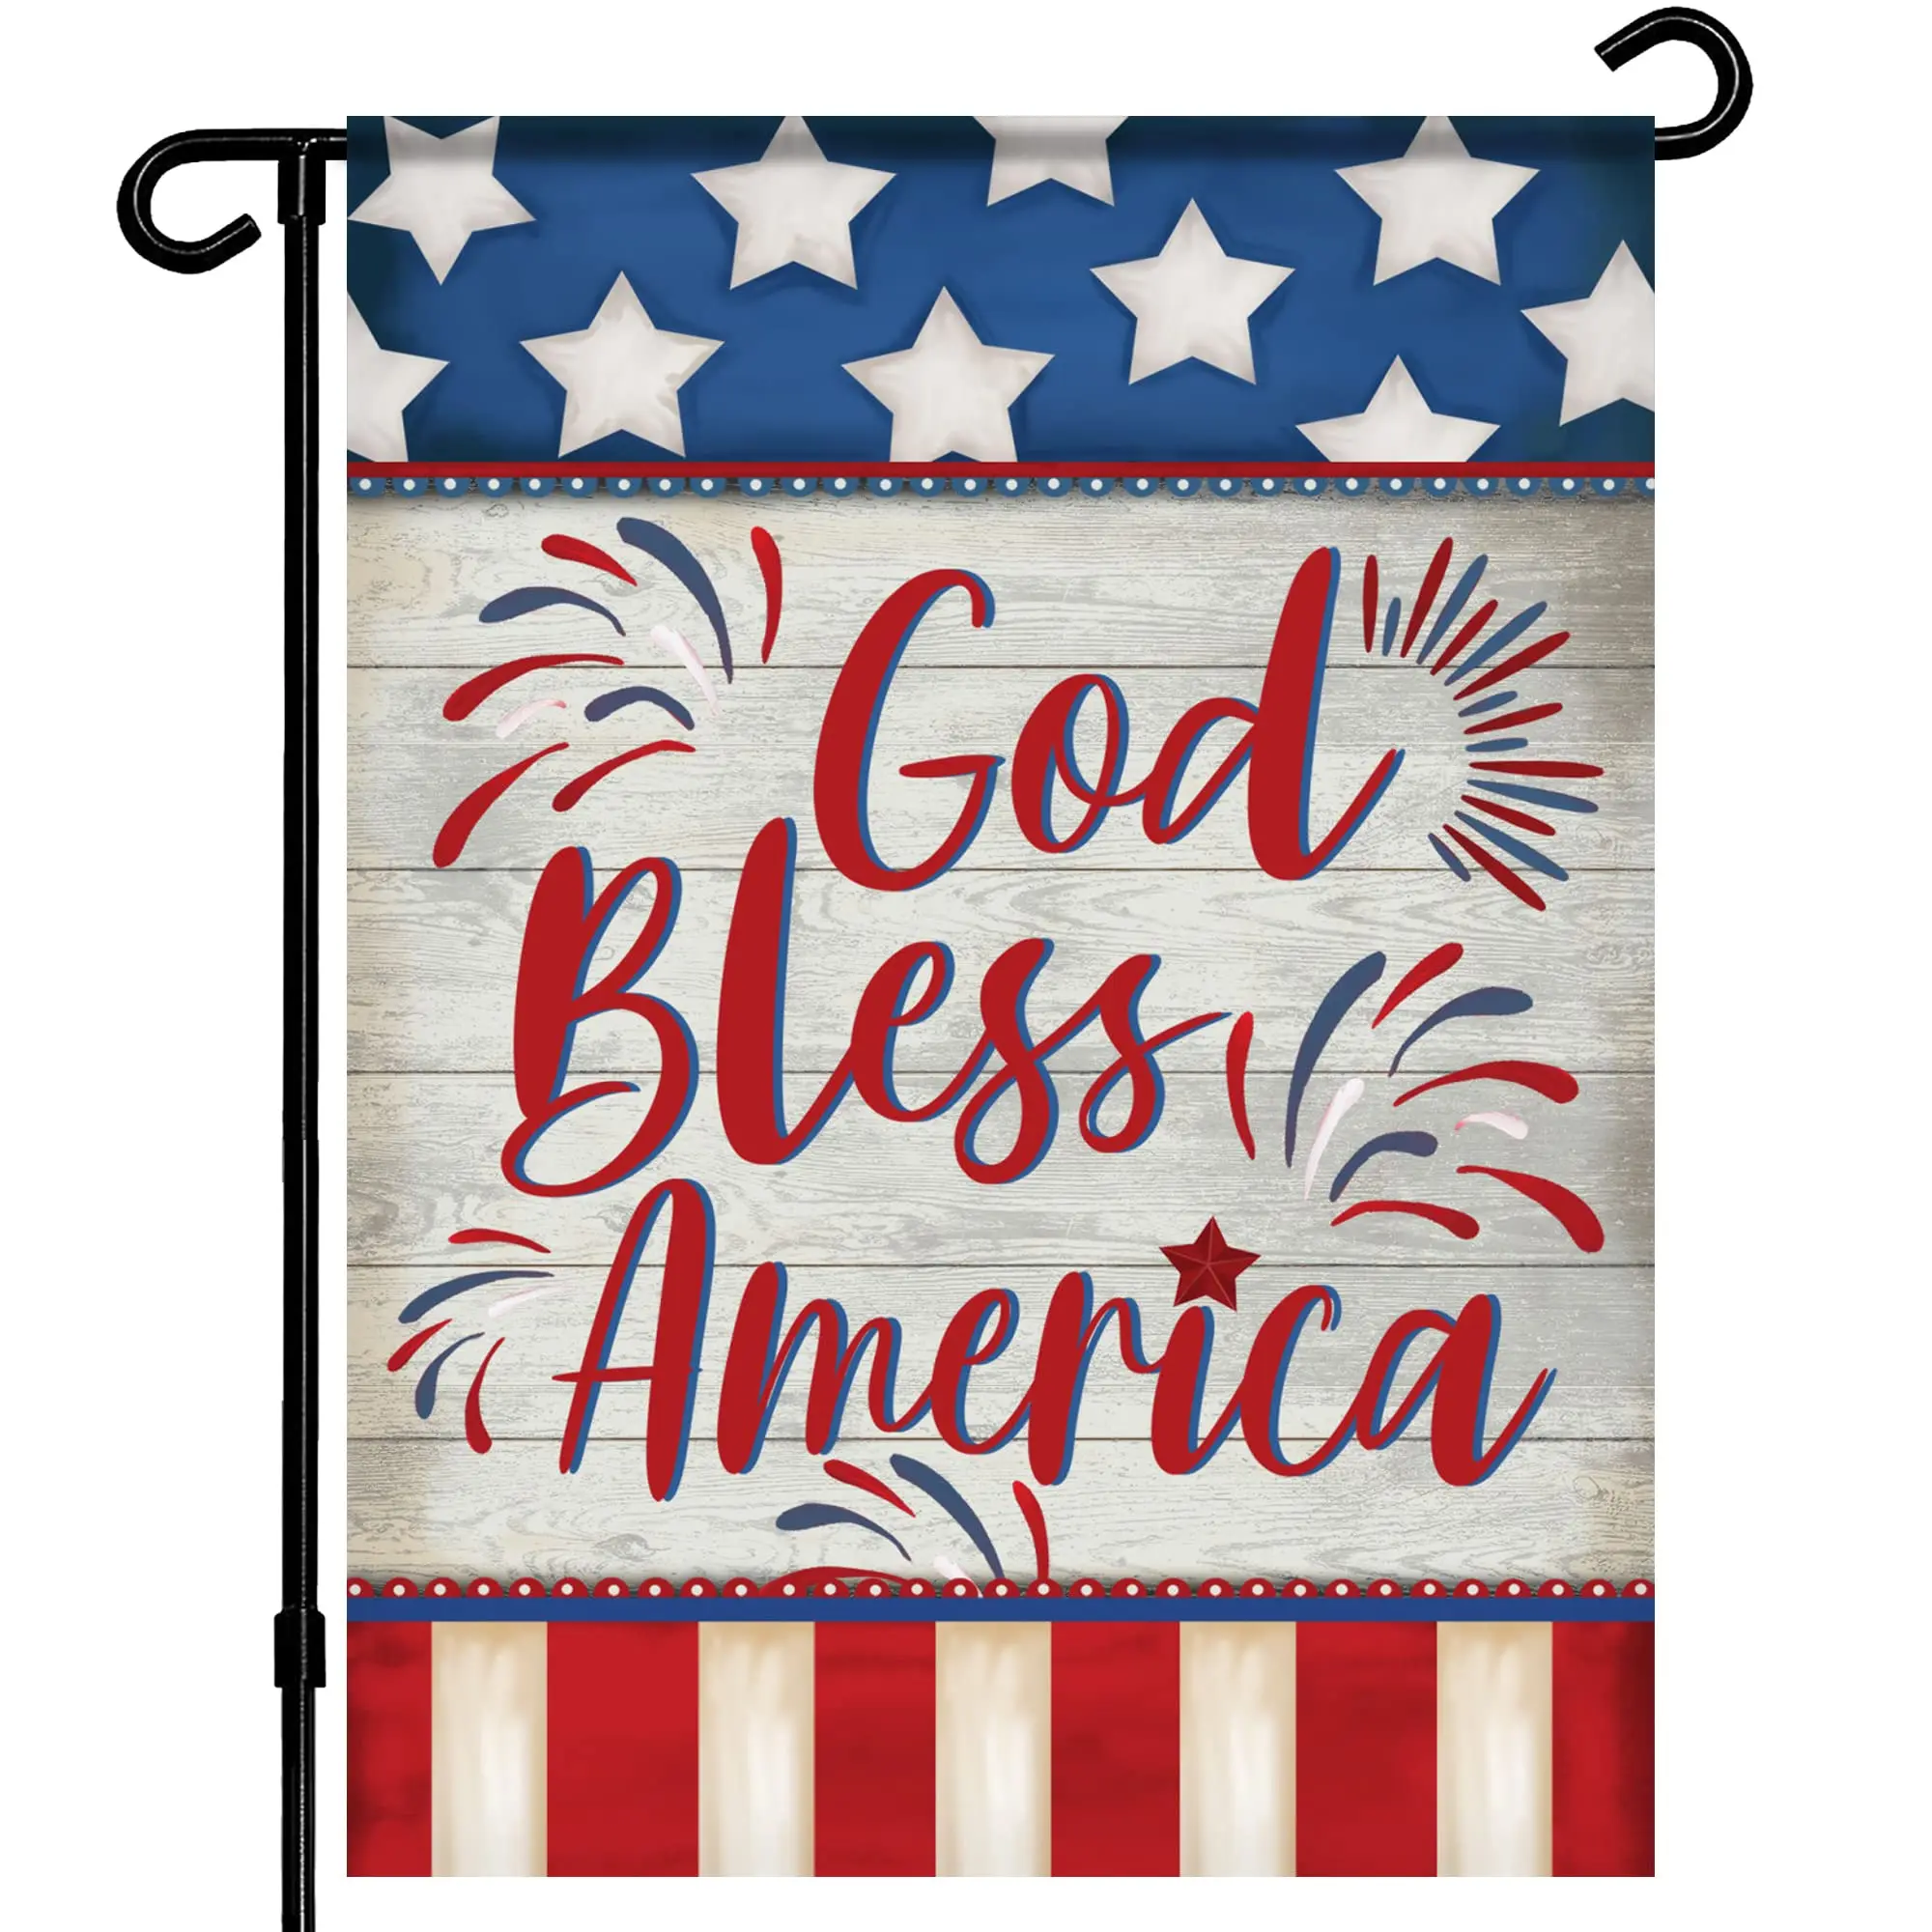 

God Bless America 4th of July Garden Flag Double Sided Patriotic Strip and Star USA Flags Independence Day Yard Outdoor Decor